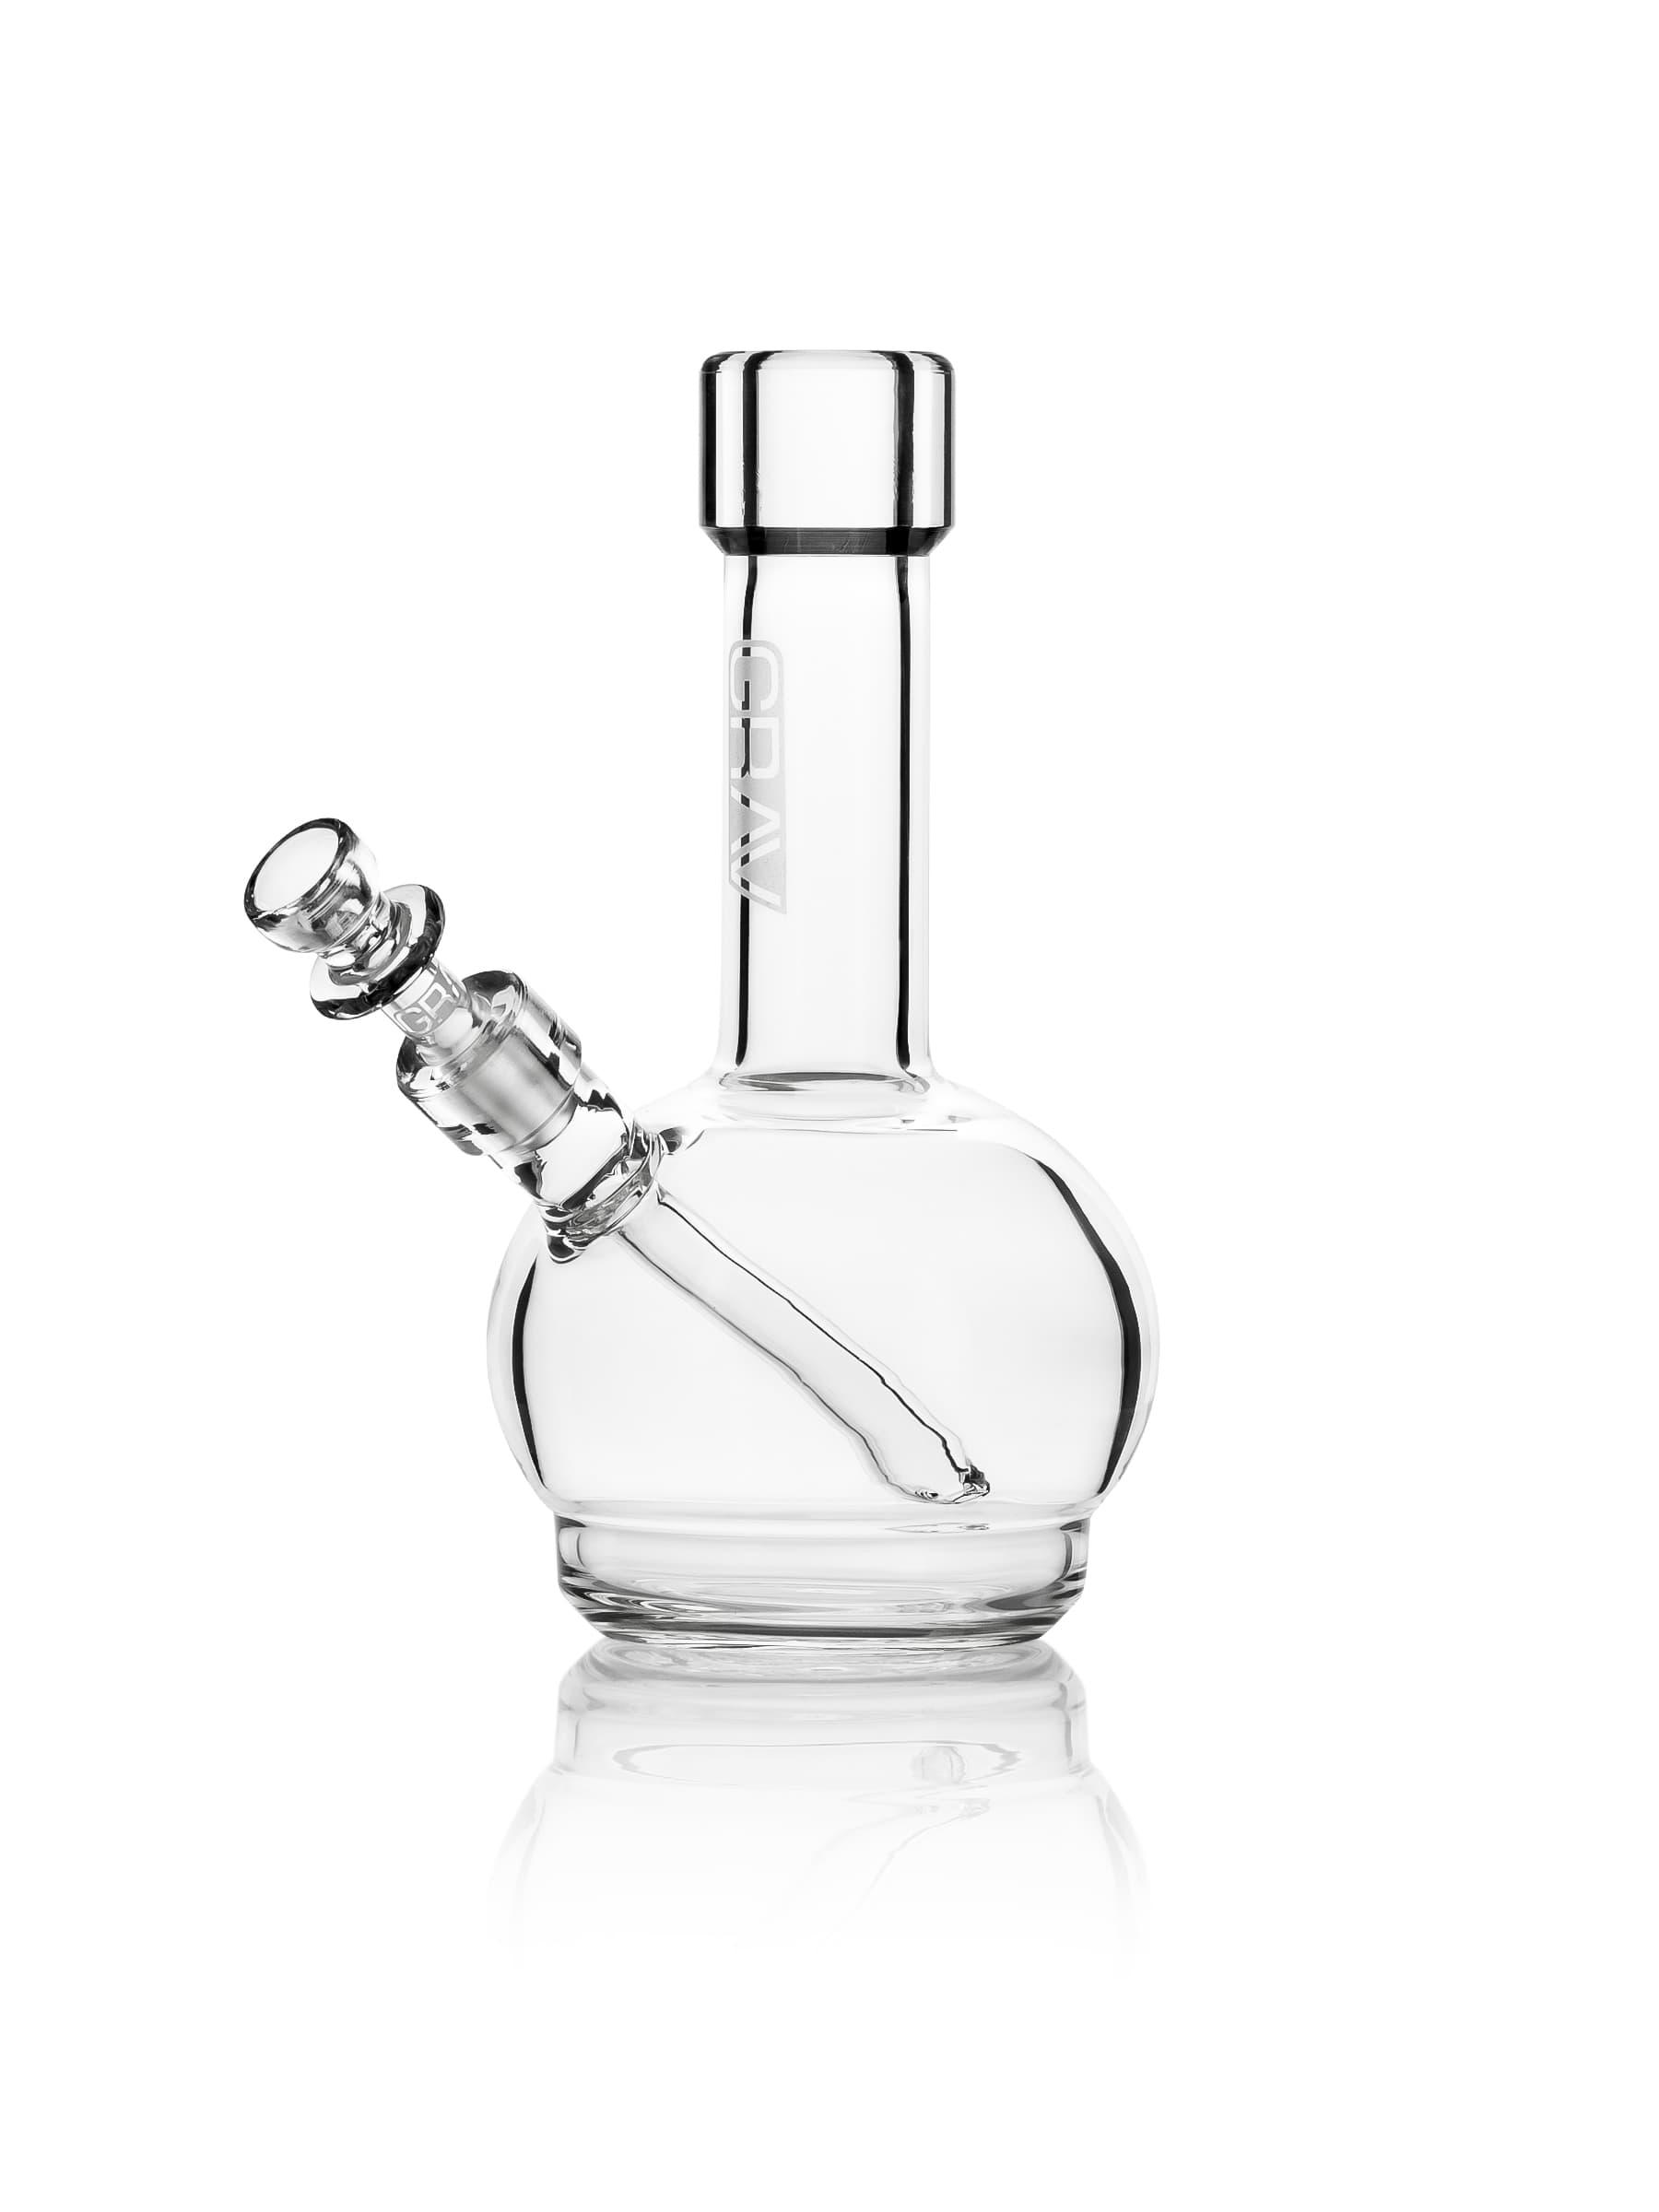 How to Clean your Bong, Water Pipe, Bubbler, or Pipe